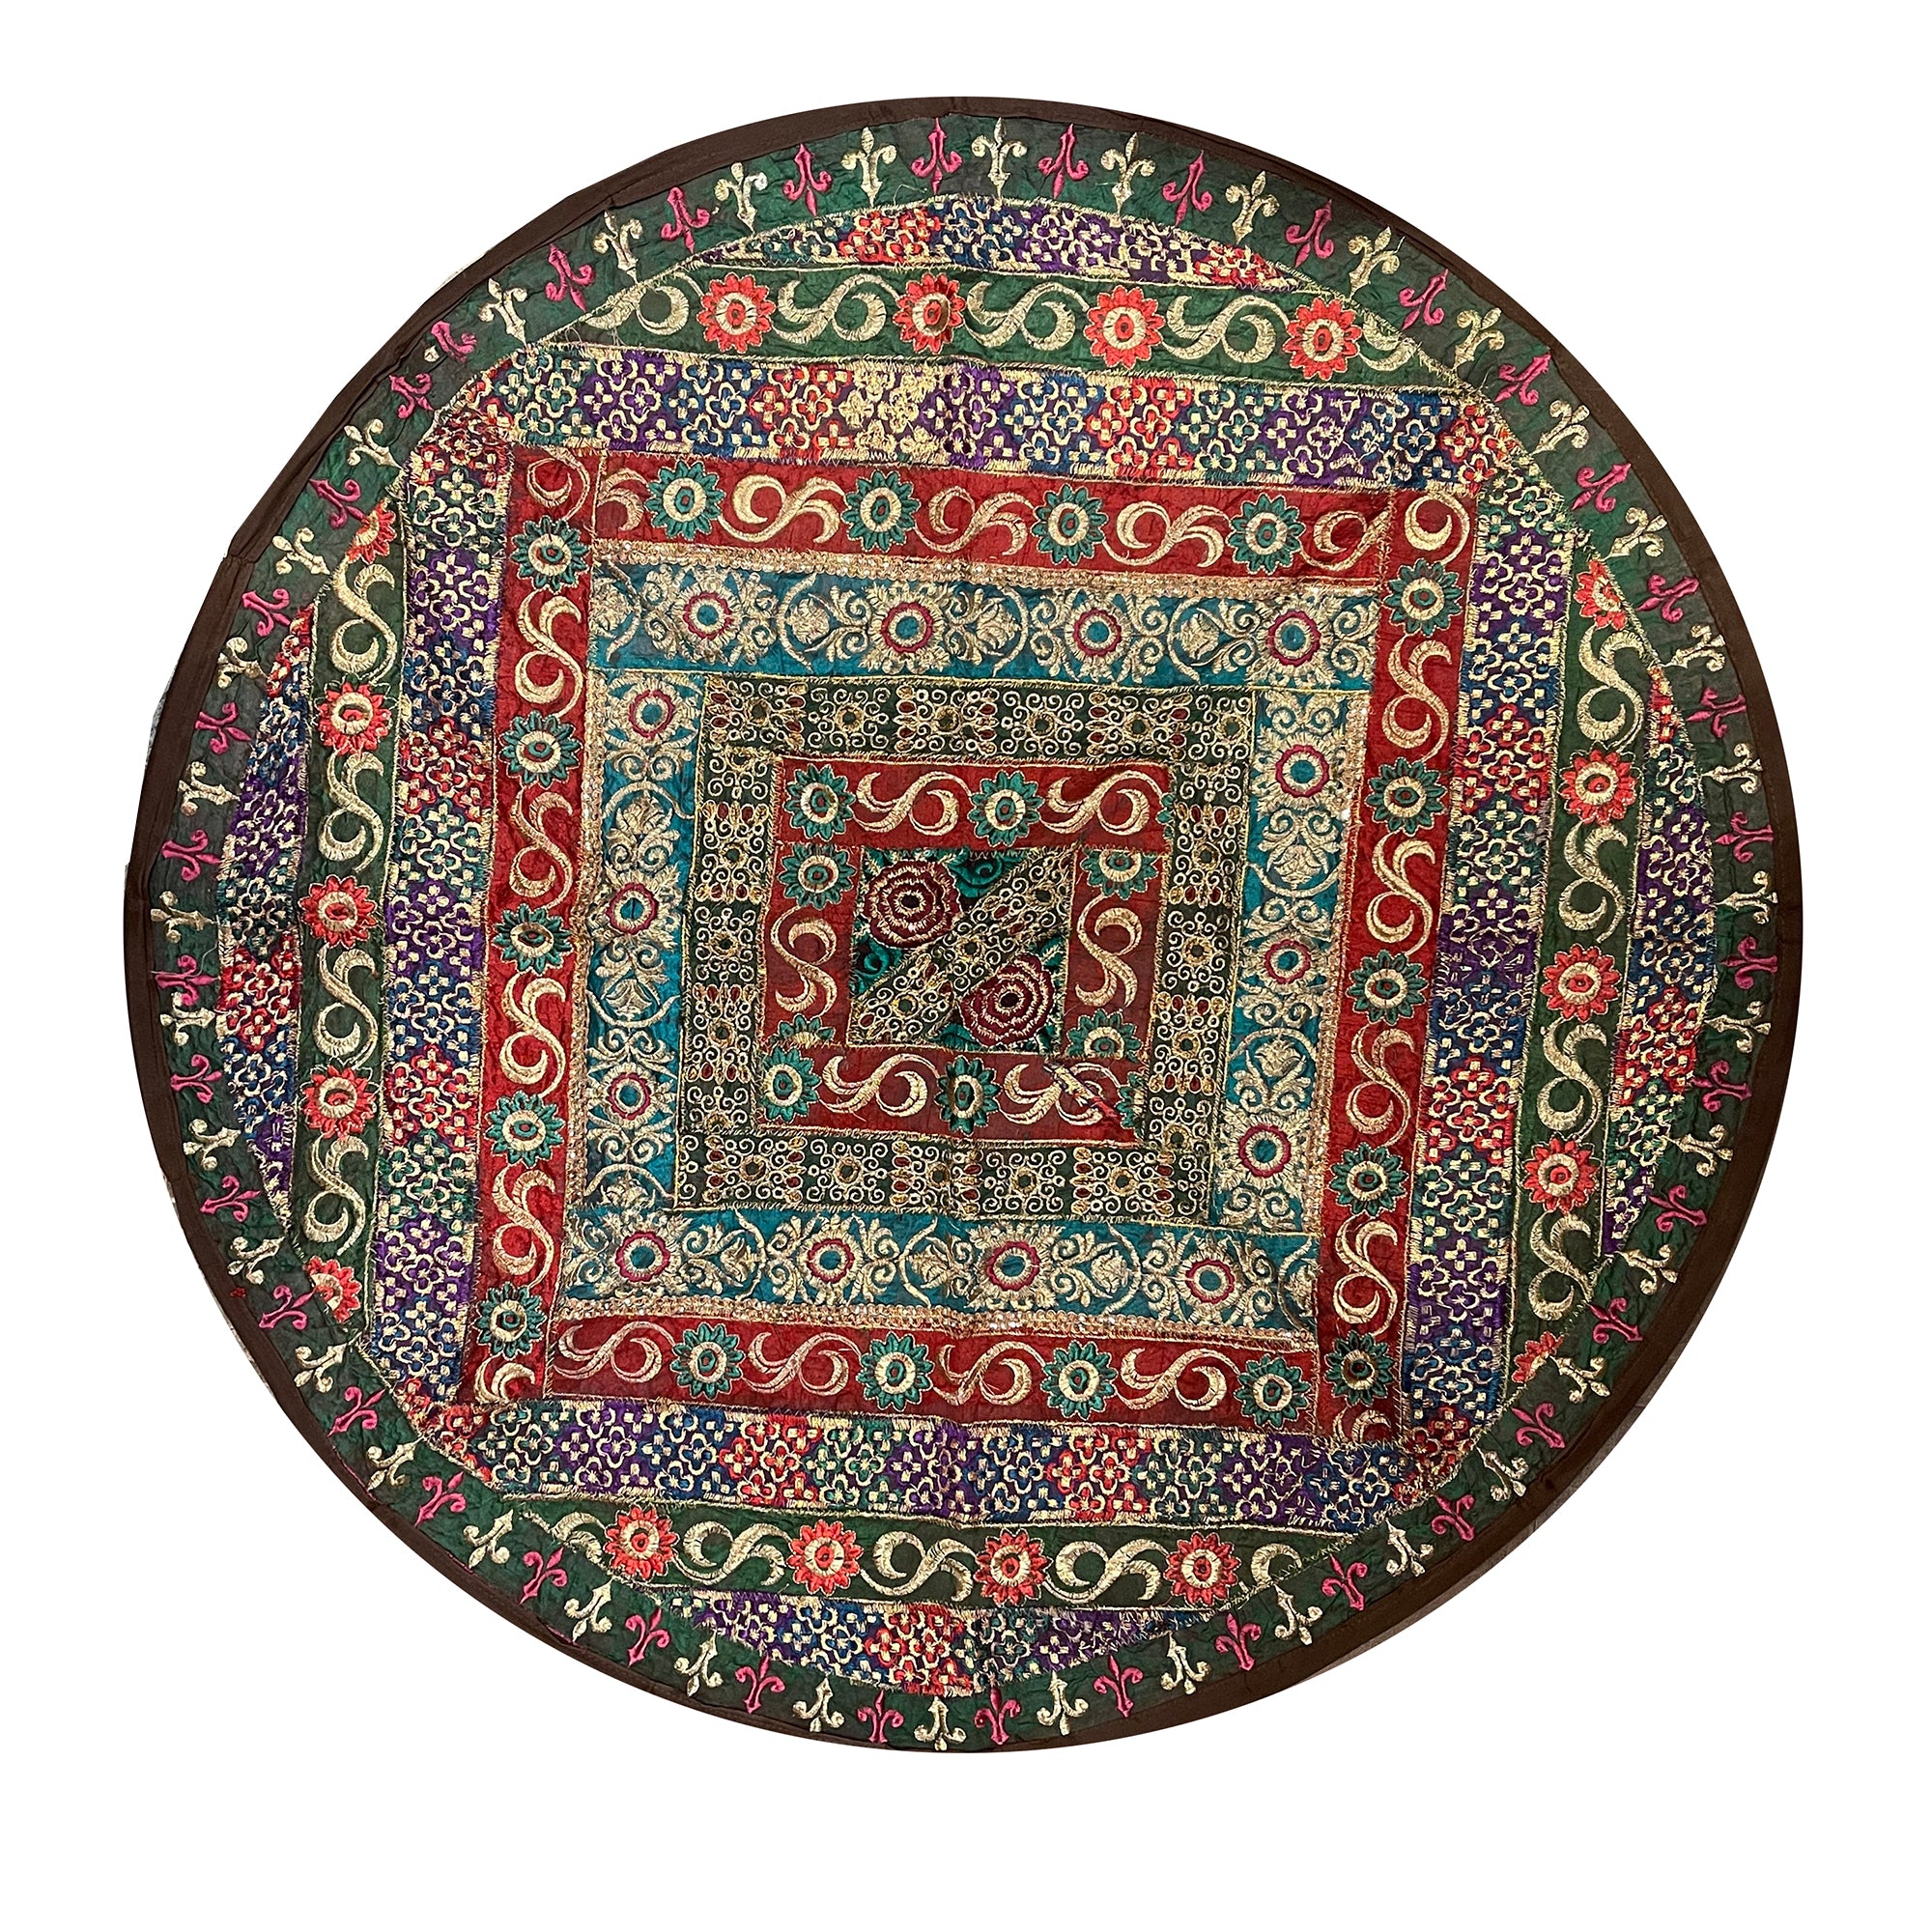 Round Wall Hanging/Table Decor  8992 - Vintage India NYC